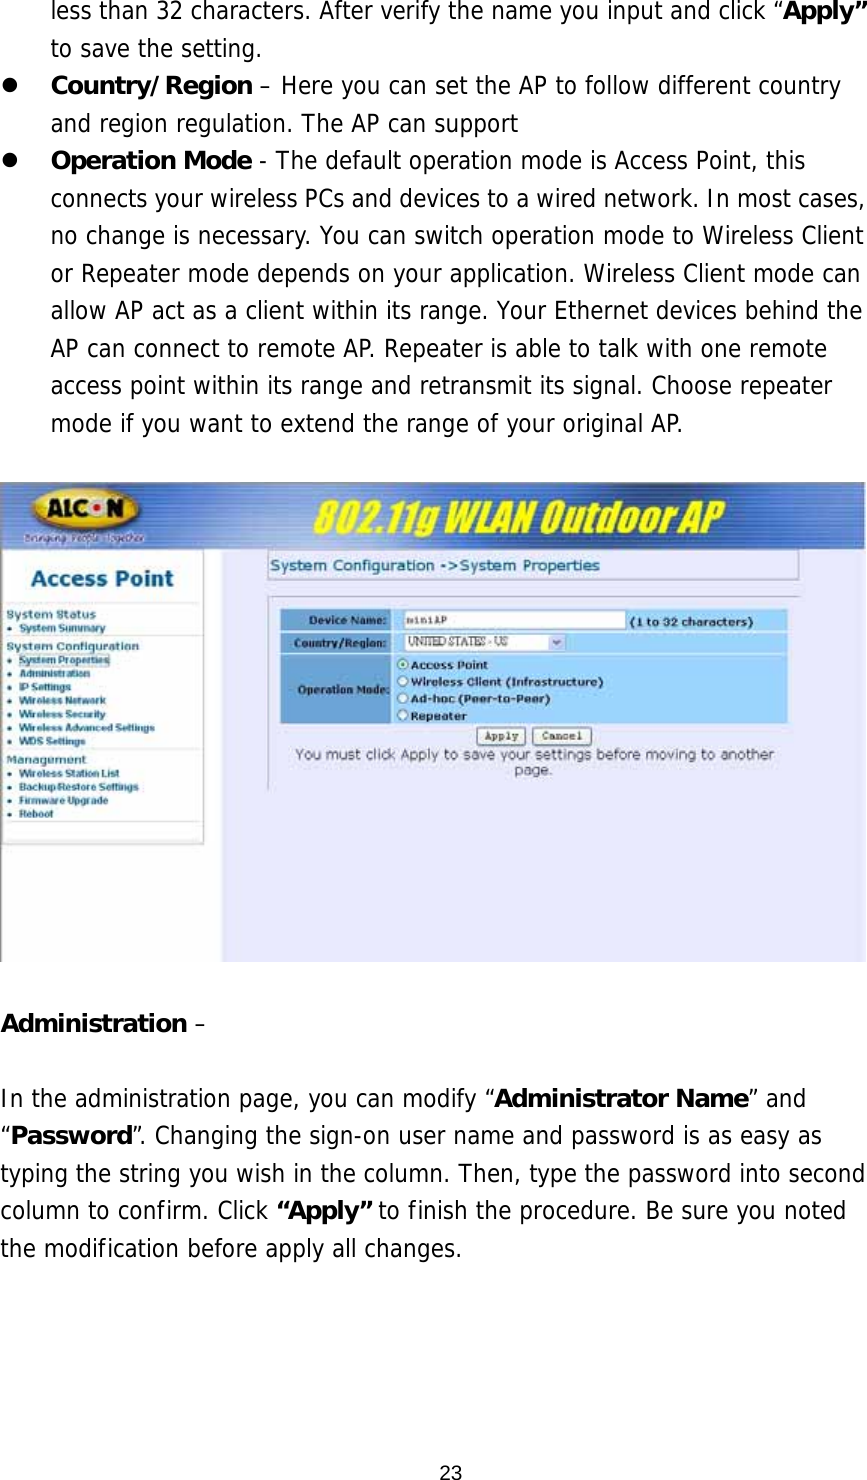 less than 32 characters. After verify the name you input and click “Apply” to save the setting. z Country/Region – Here you can set the AP to follow different country and region regulation. The AP can support  z Operation Mode - The default operation mode is Access Point, this connects your wireless PCs and devices to a wired network. In most cases, no change is necessary. You can switch operation mode to Wireless Client or Repeater mode depends on your application. Wireless Client mode can allow AP act as a client within its range. Your Ethernet devices behind the AP can connect to remote AP. Repeater is able to talk with one remote access point within its range and retransmit its signal. Choose repeater mode if you want to extend the range of your original AP.    Administration –   In the administration page, you can modify “Administrator Name” and “Password”. Changing the sign-on user name and password is as easy as typing the string you wish in the column. Then, type the password into second column to confirm. Click “Apply” to finish the procedure. Be sure you noted the modification before apply all changes.    23